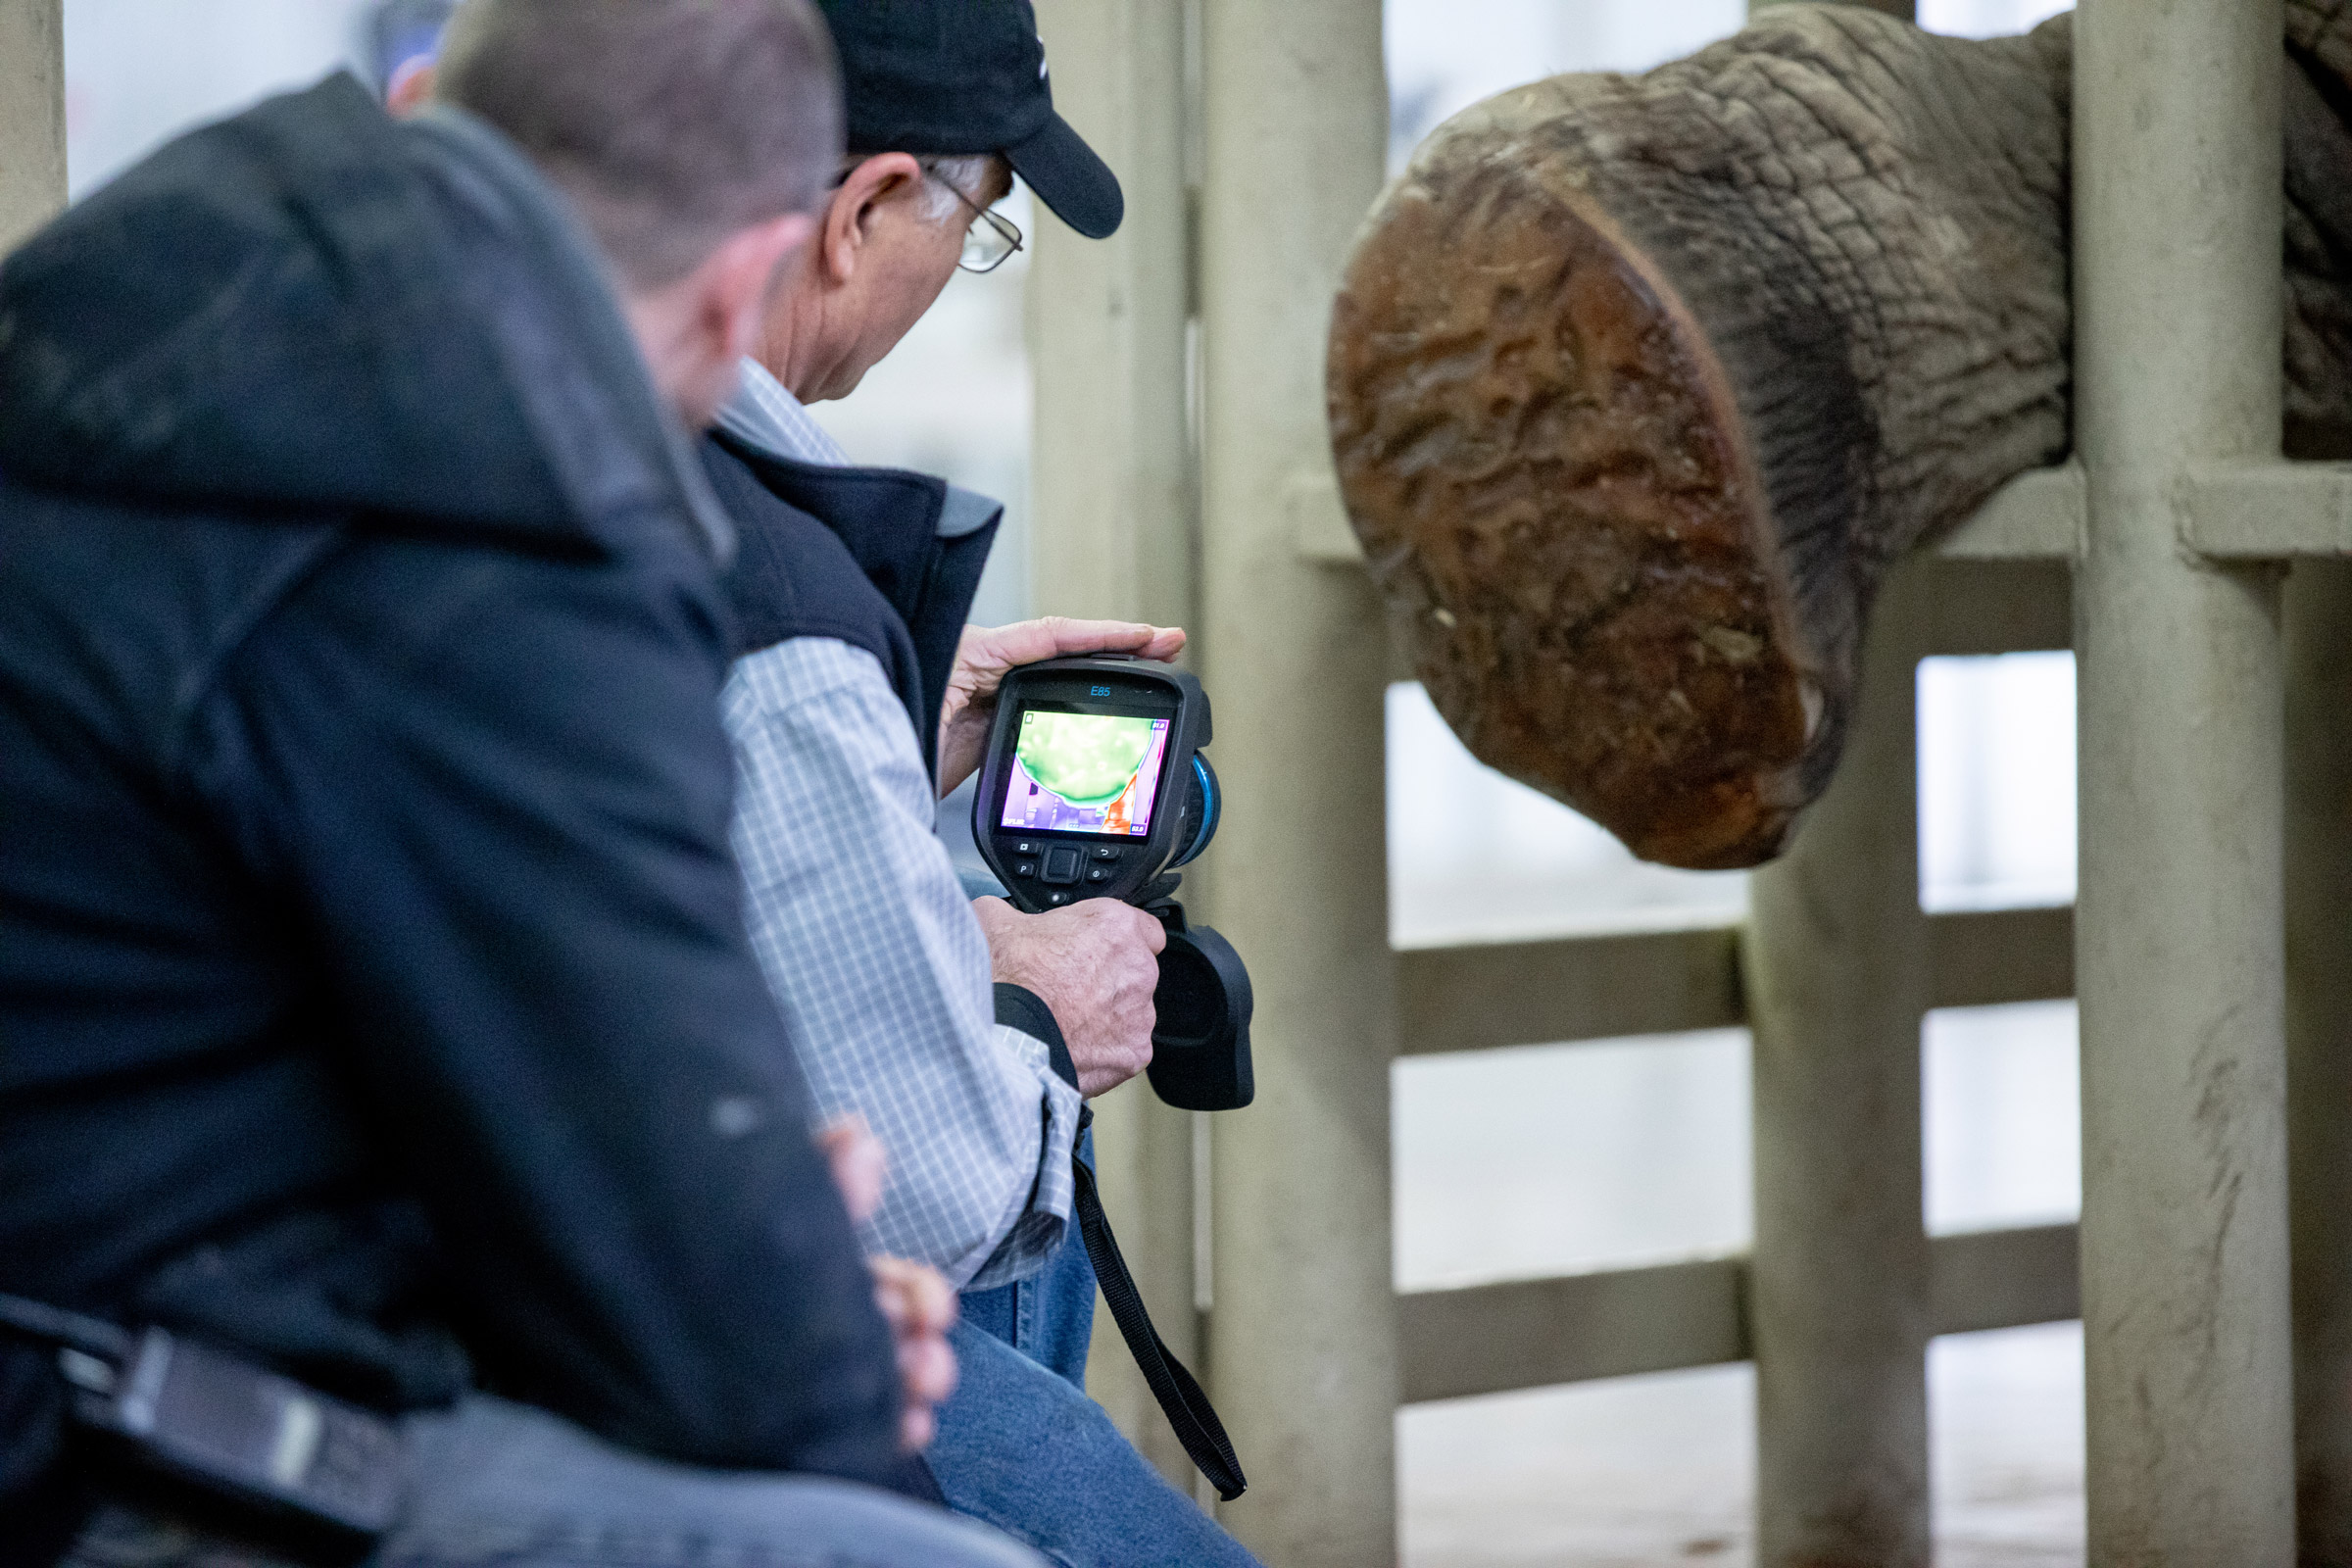 An elephant extends her foot while Steven Scott uses an electronic device to inspect it